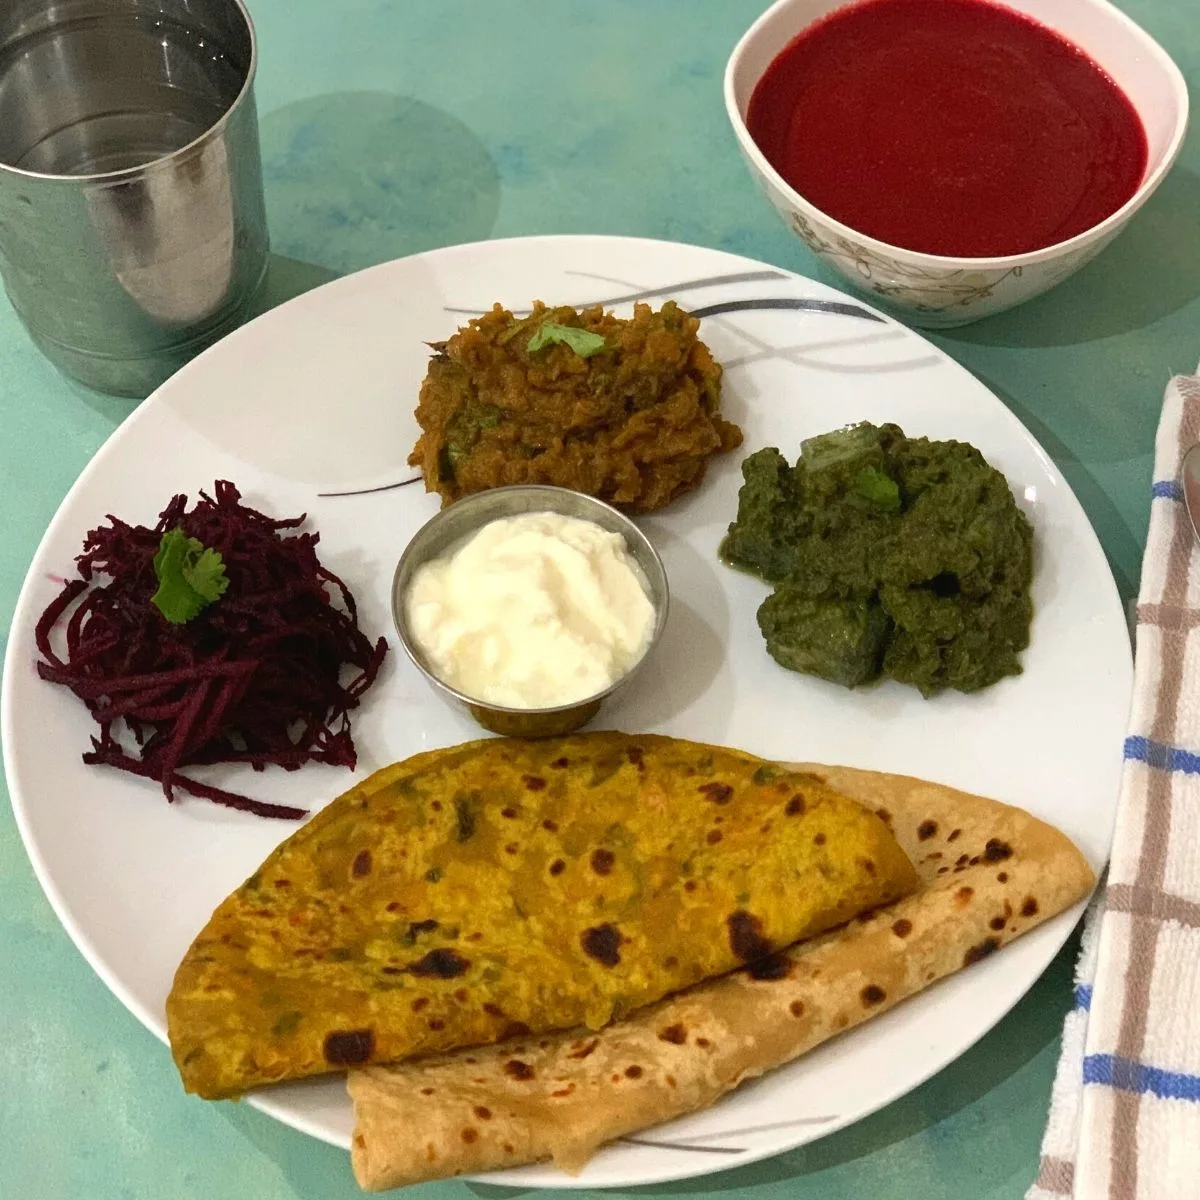 Winter Special Vegetarian Thali has Clockwise from 6'o clock, 2 Parathas (carrot & Plain), Beetroot Salad, Turnip Bharta, Kale, tofu and corn curry and yogurt in between. Beetroot soup is seen on the side along with a glass of water on the other side.